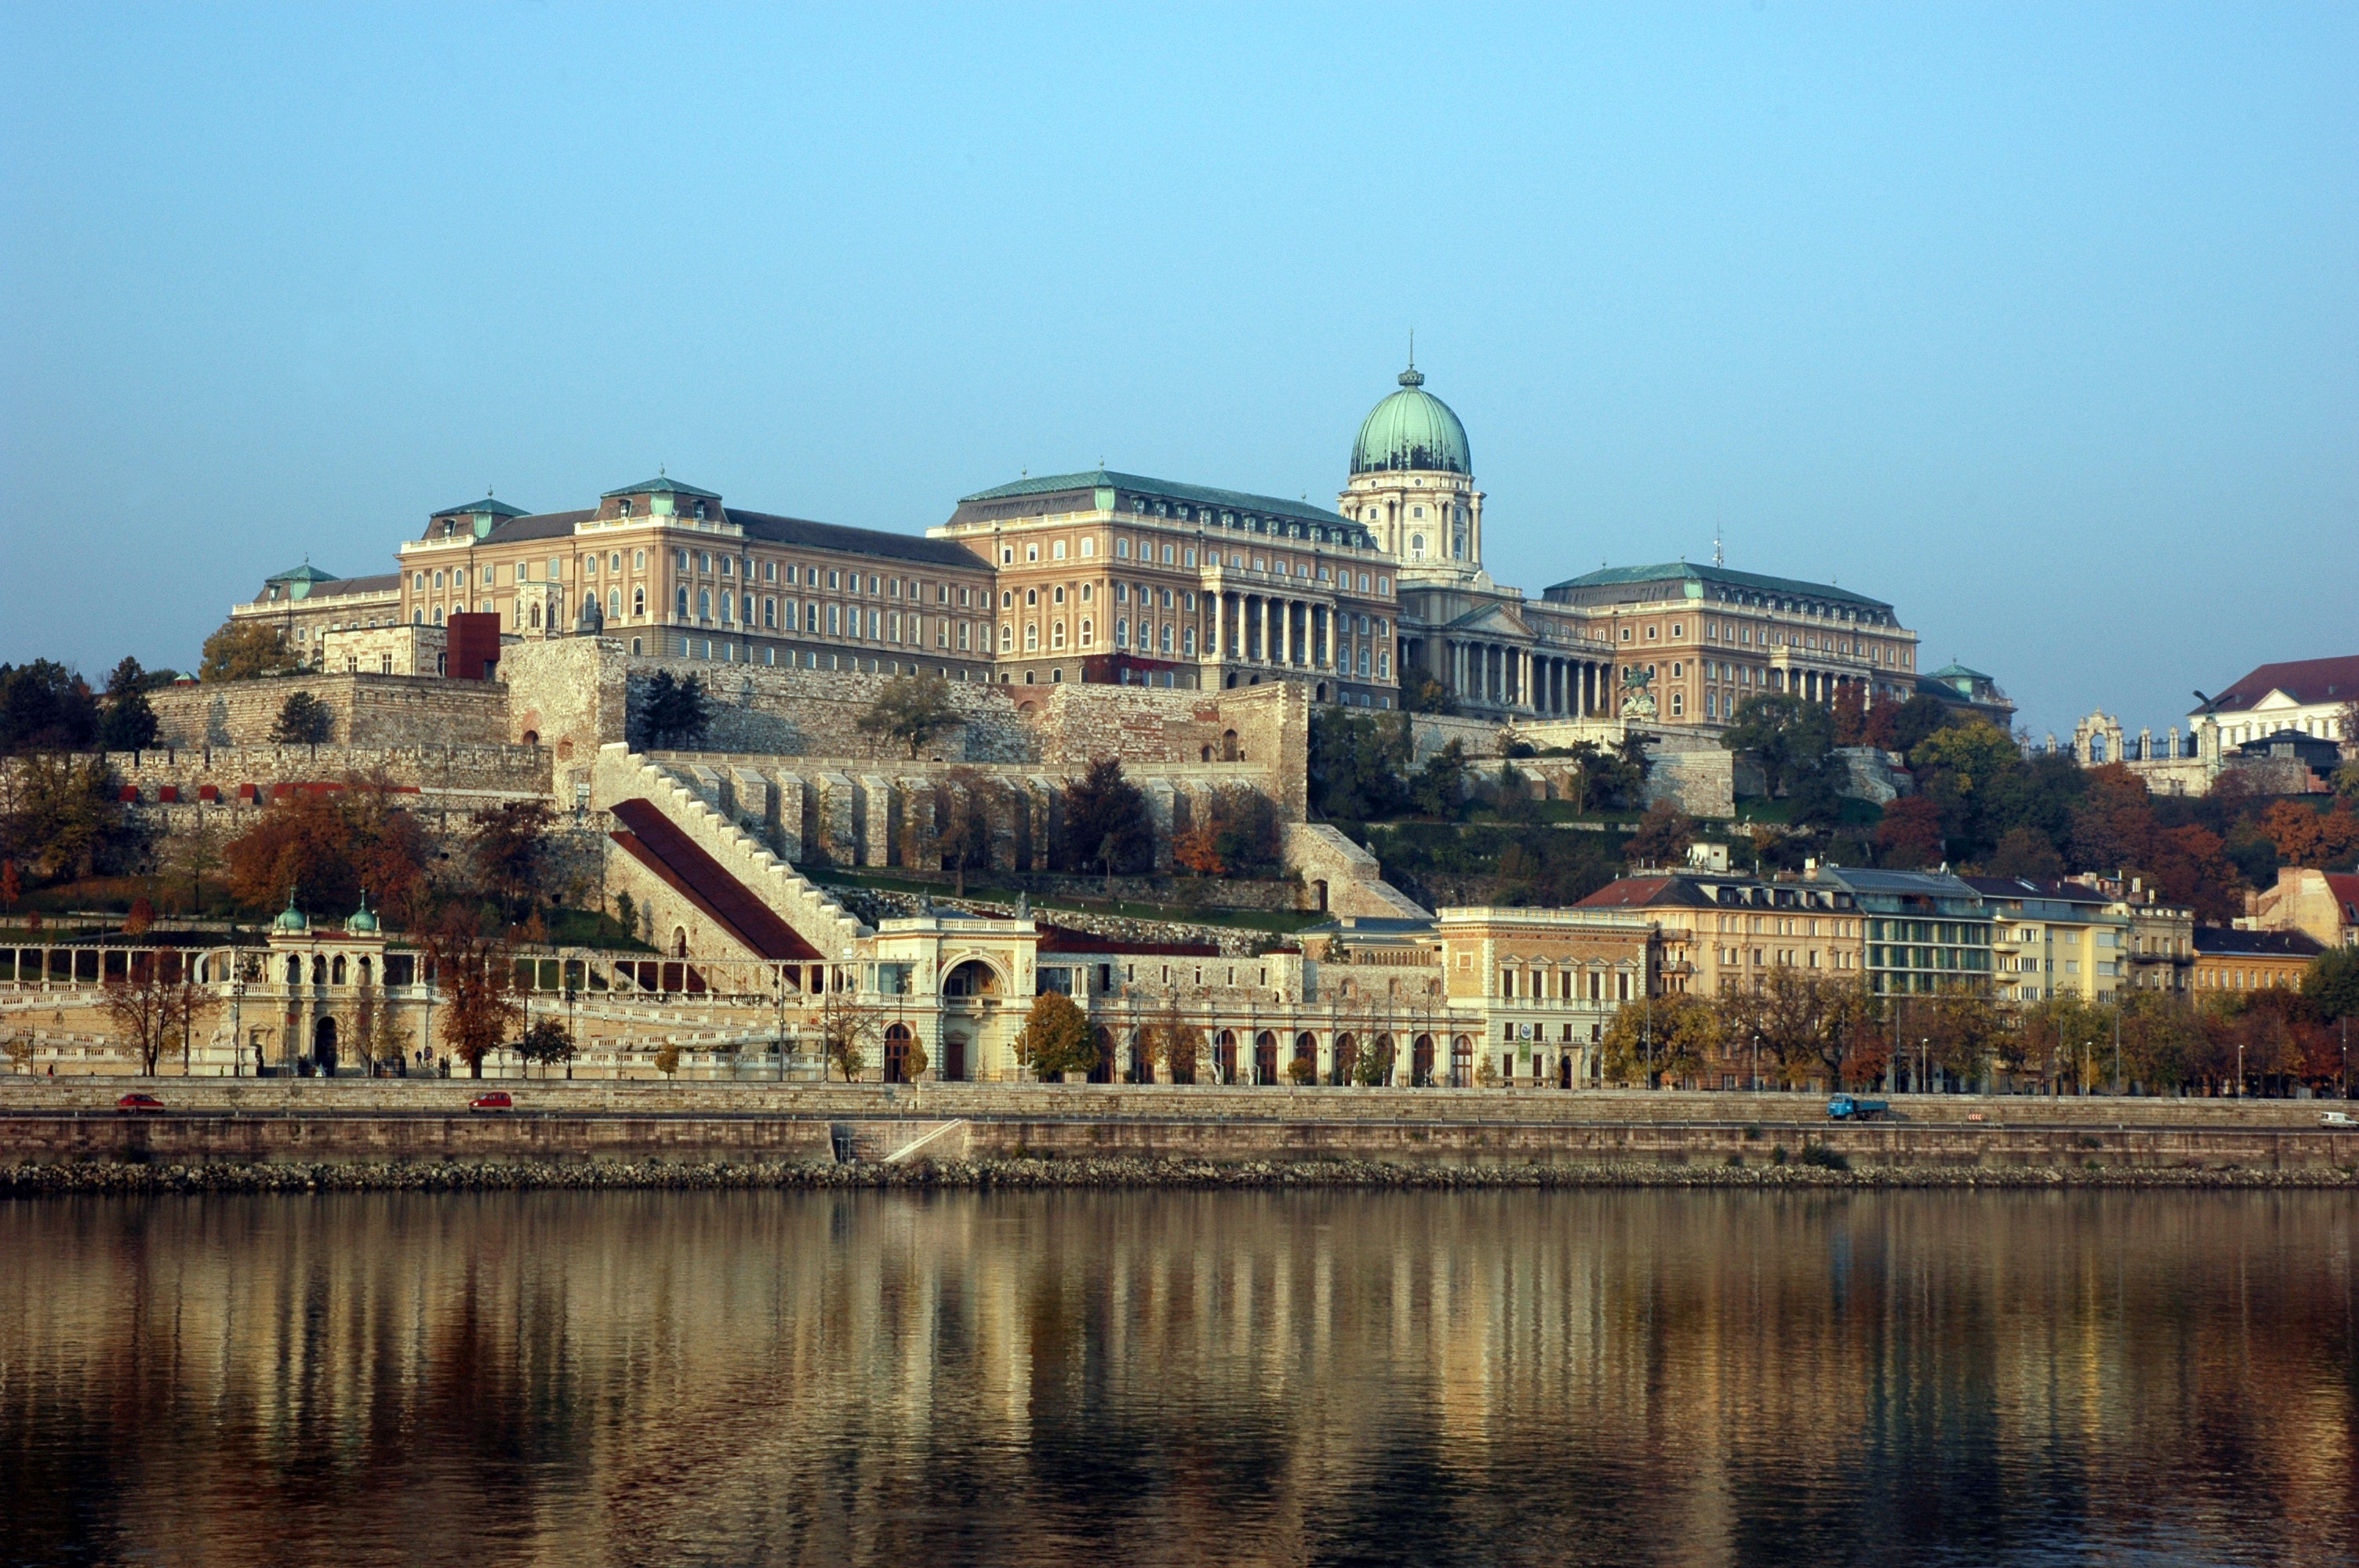 Buda castle near body of water under blue sky during daytime photo